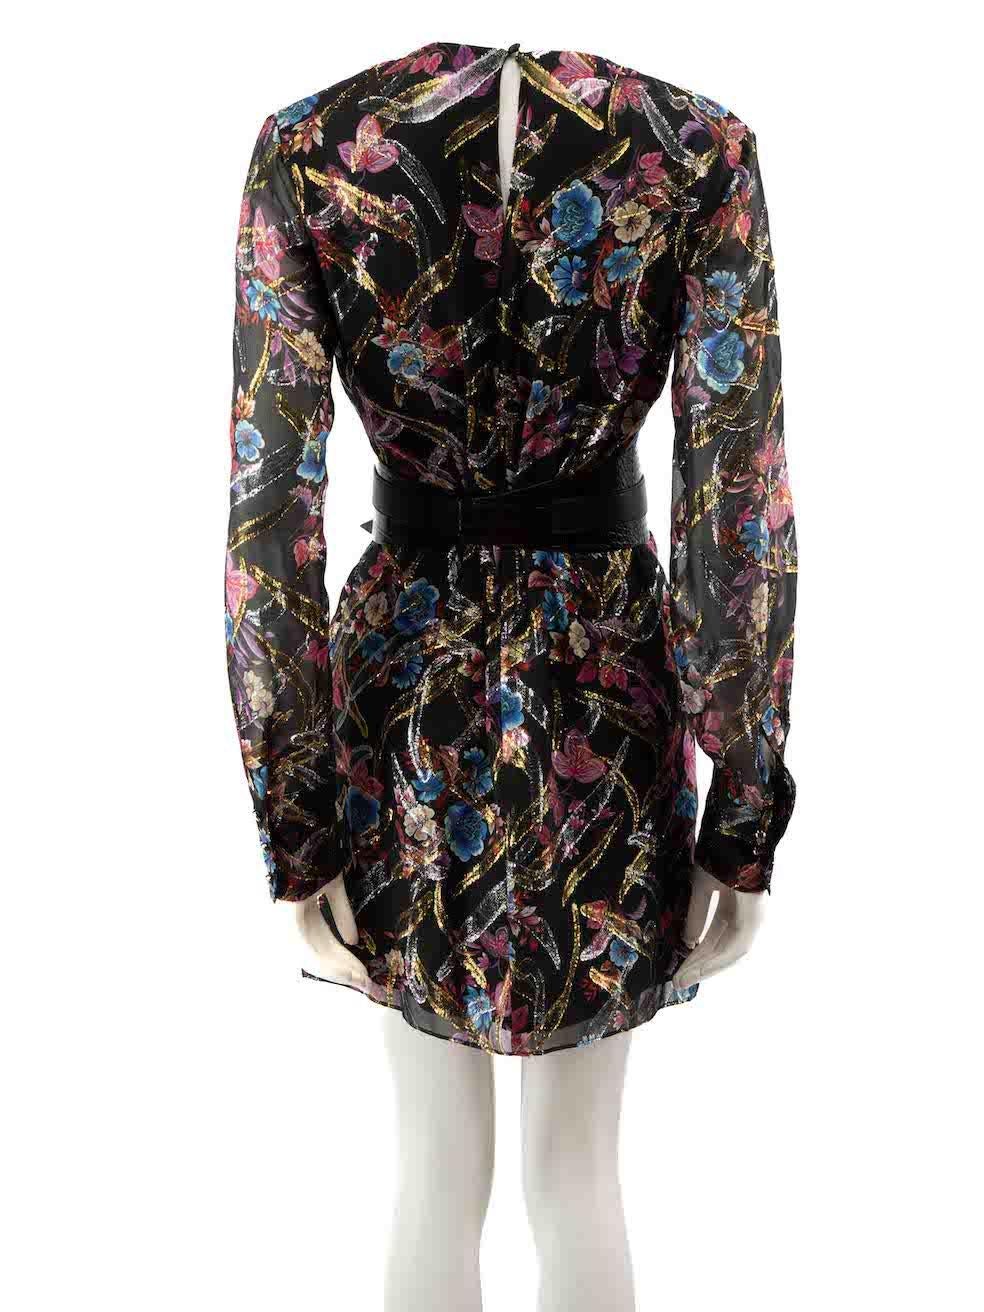 Pinko Floral Print Metallic Belted Mini Dress Size M In Good Condition For Sale In London, GB